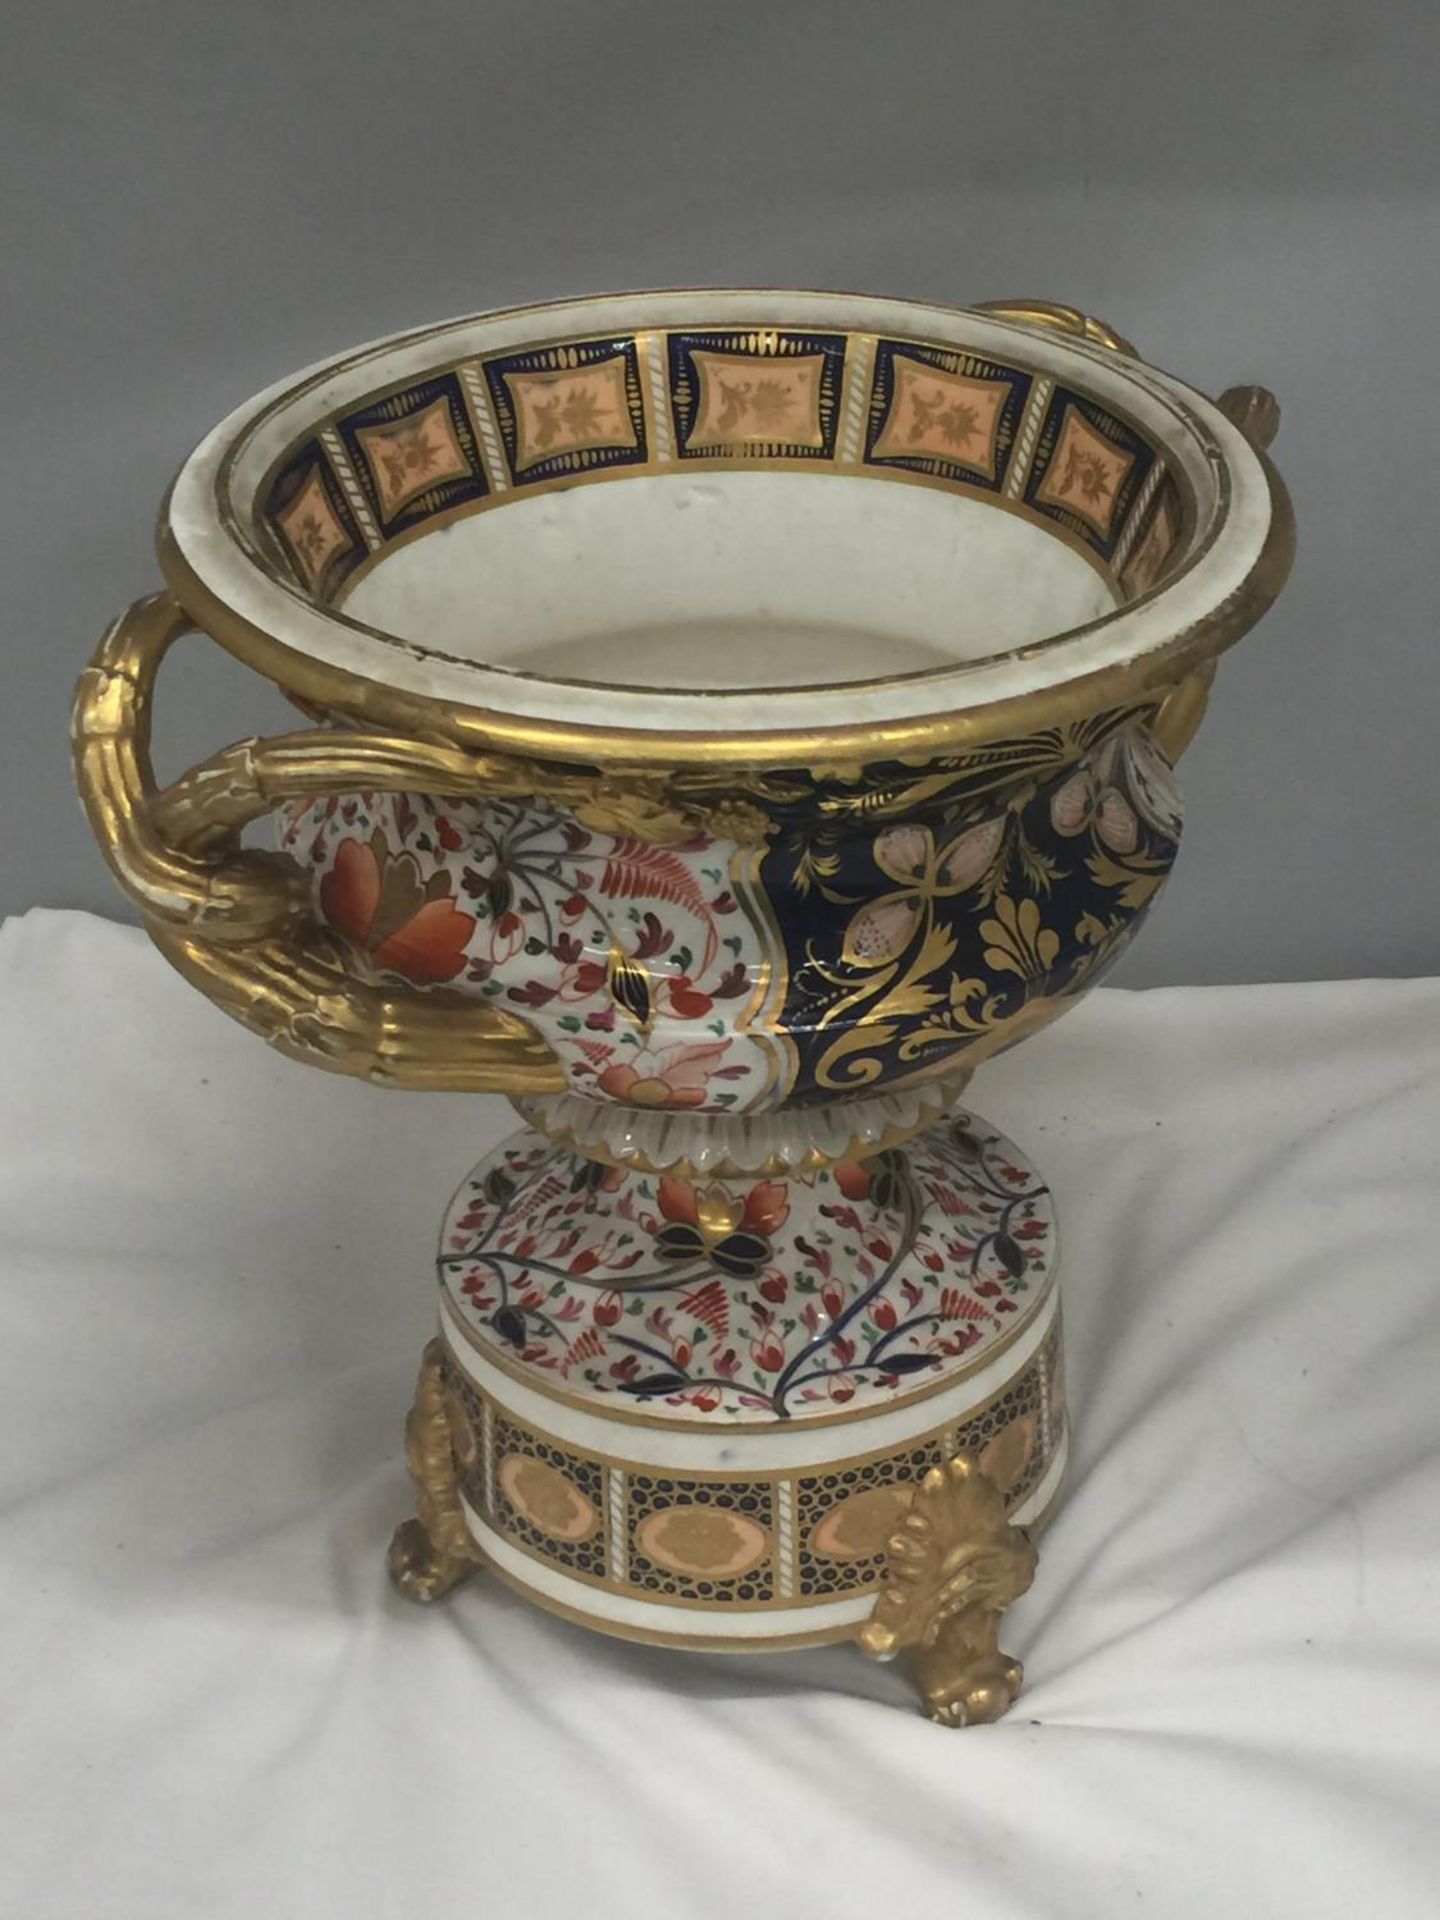 A MID 19TH CENTURY PORCELAIN CAMPANA SHAPED URN ON STAND WITH ELABORATE GILT DECORATION, HEIGHT 32CM - Image 3 of 4